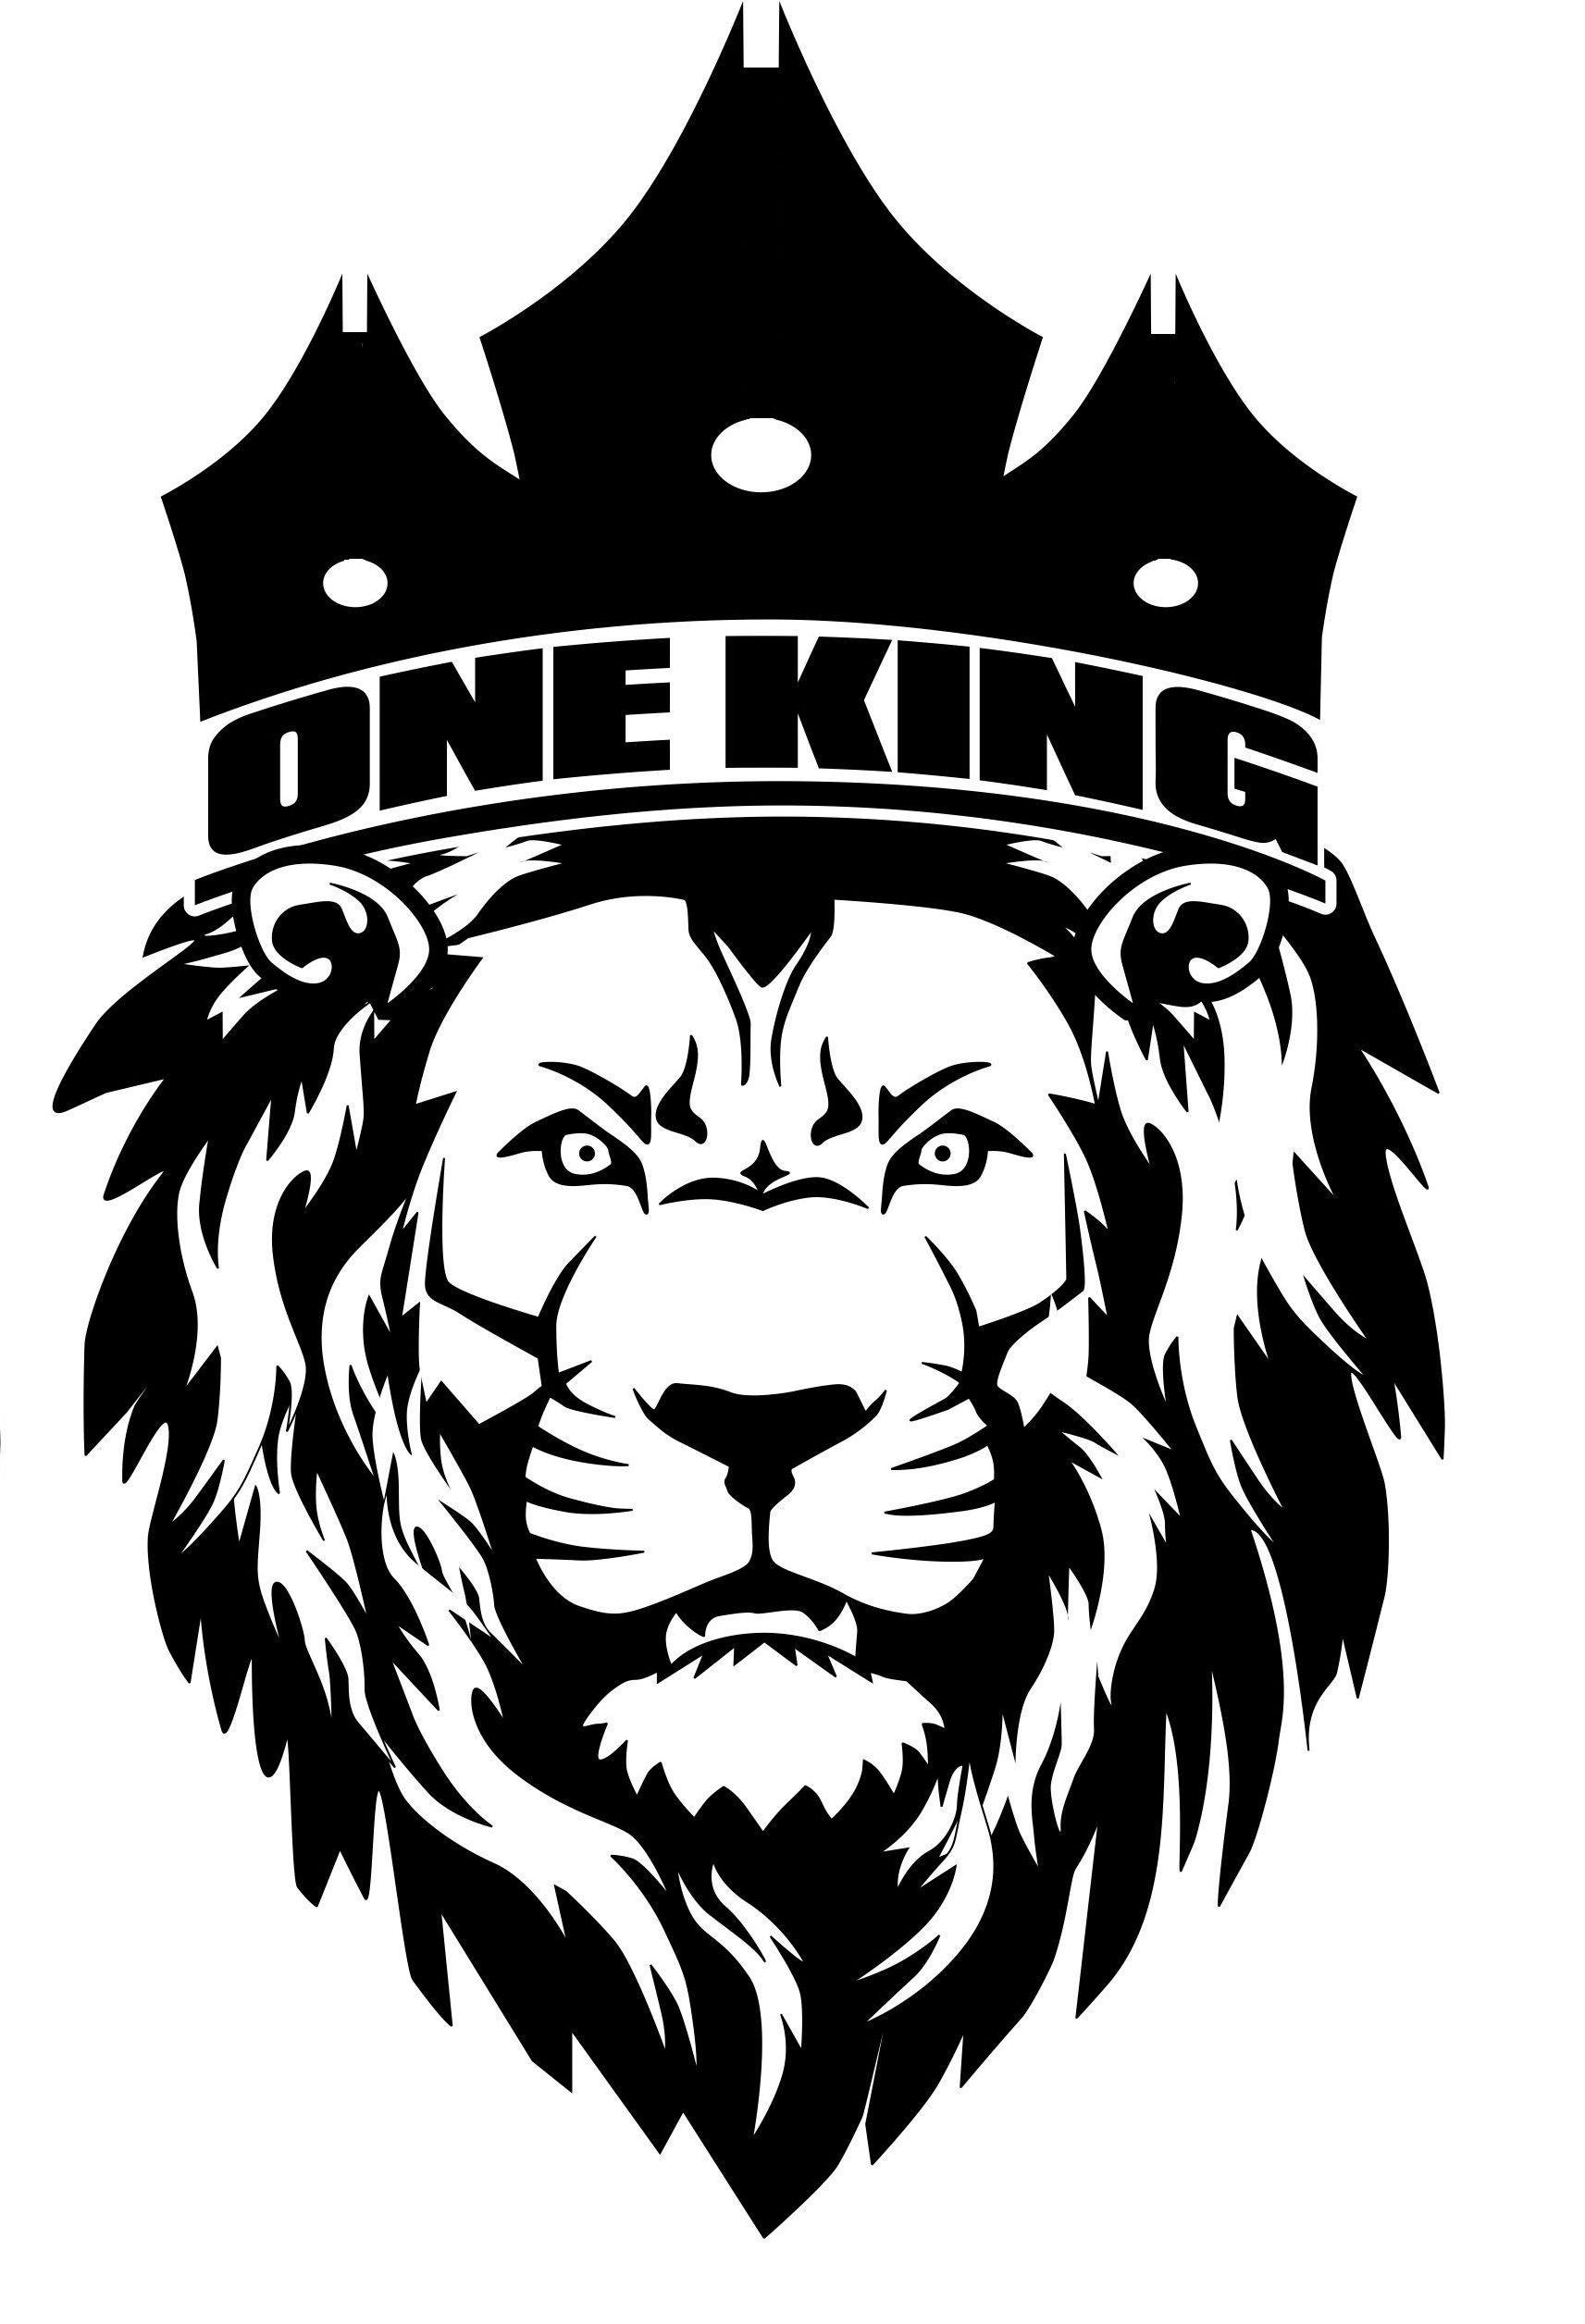 King of Sports Logo - One King Sports. Mud and Adventure. Outdoor Active Adventures